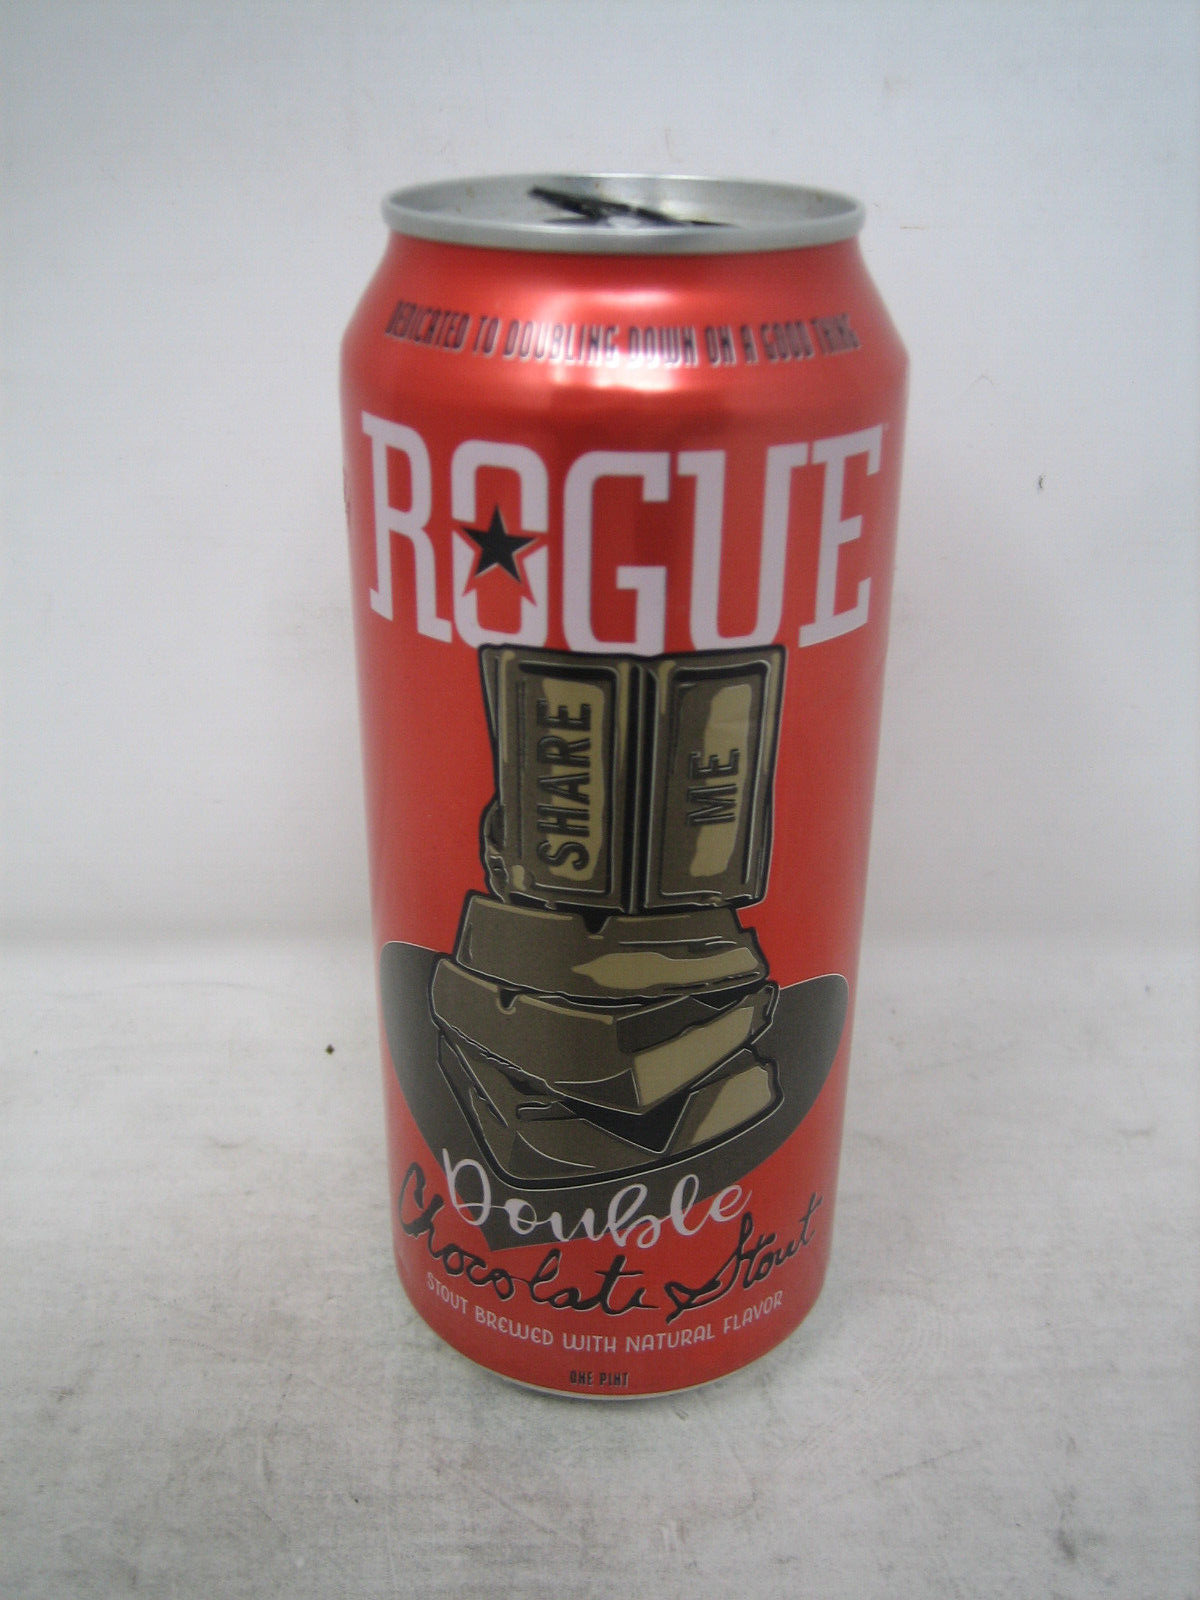 ROGUE DOUBLE CHOCOLATE STOUT 9% BEER CAN